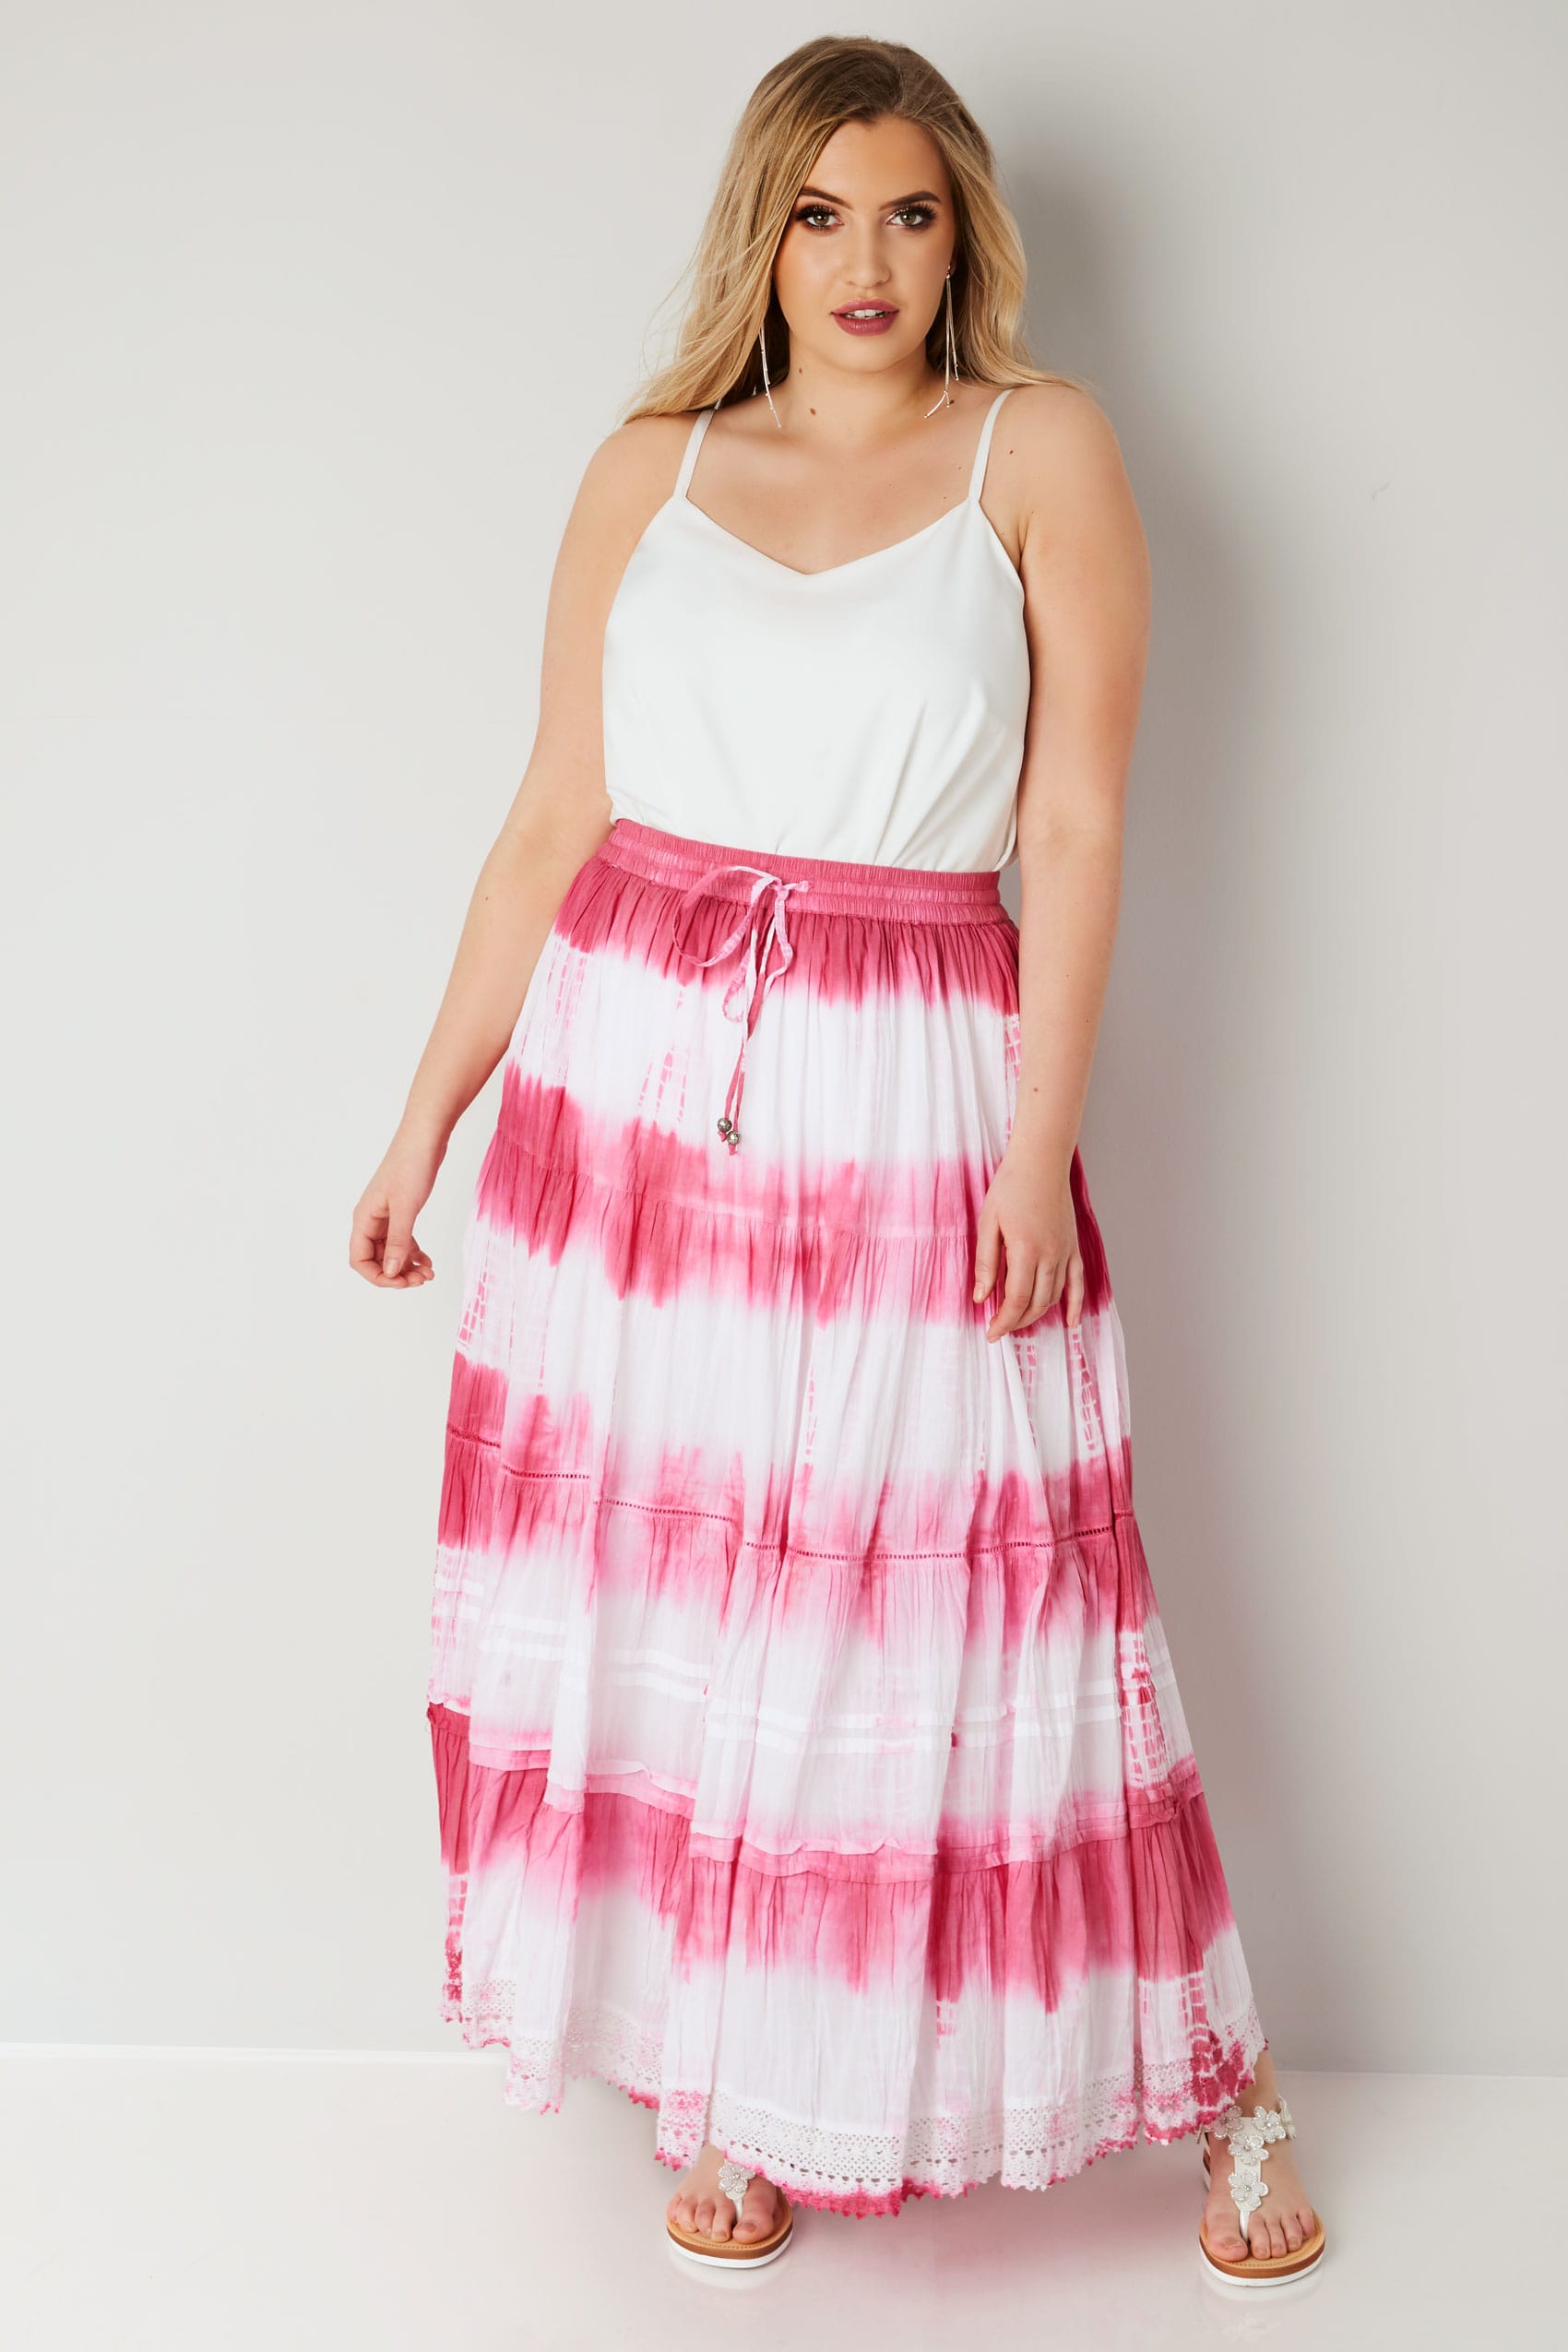 Pink & White Tie Dye Tiered Maxi Skirt With Lace Trim Hem, Plus size 16 ...